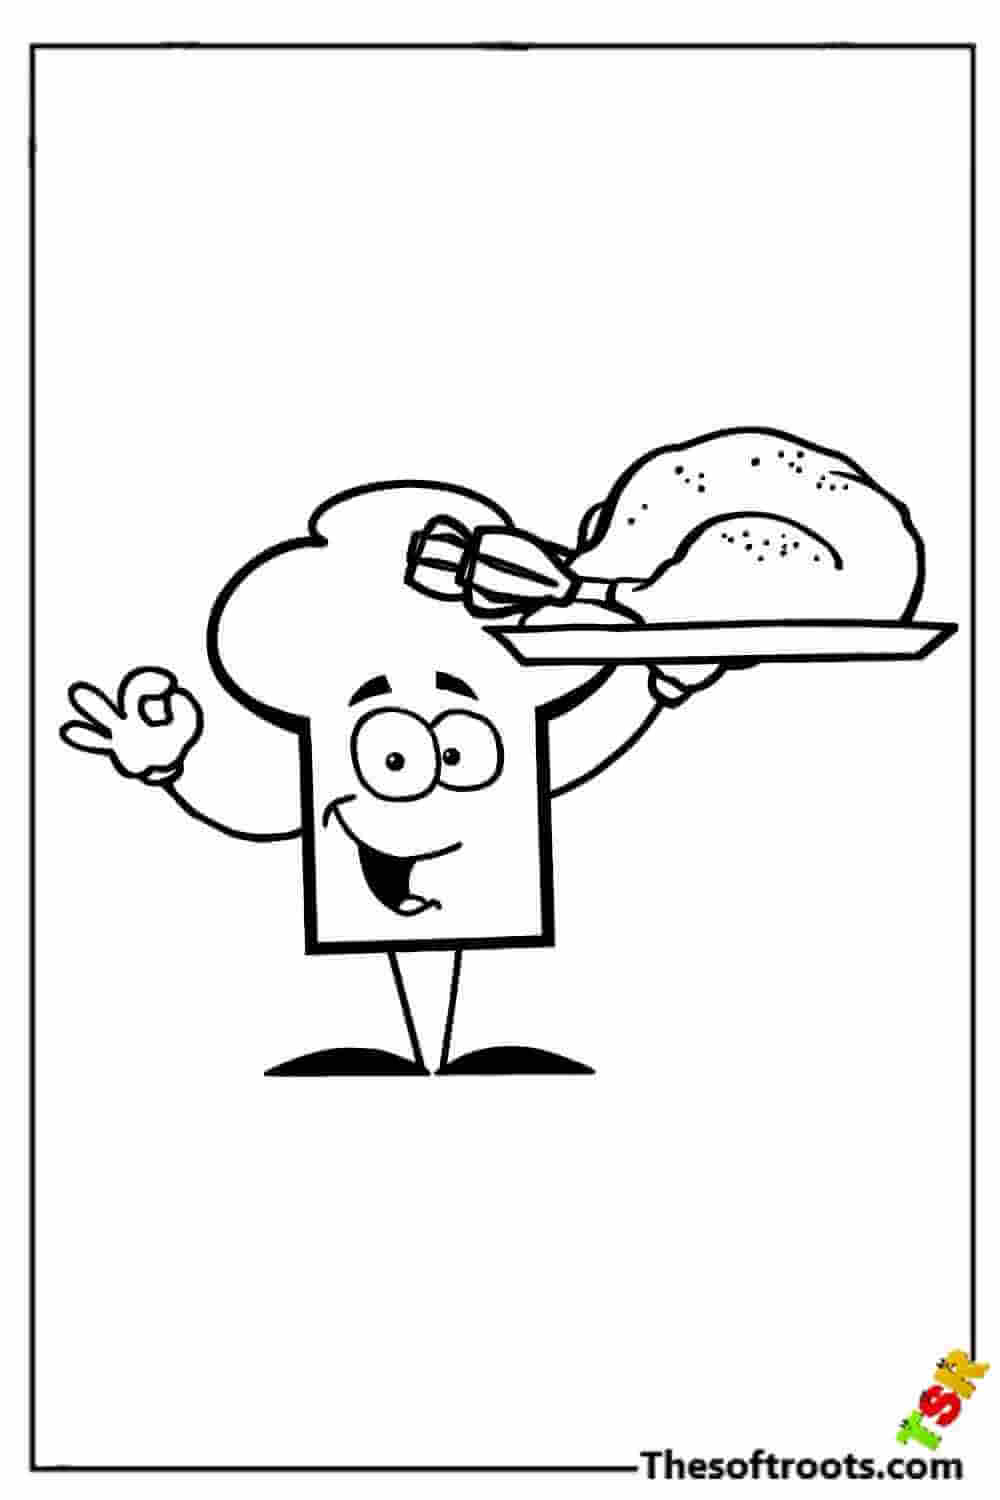 Cartoon turkey chef coloring pages